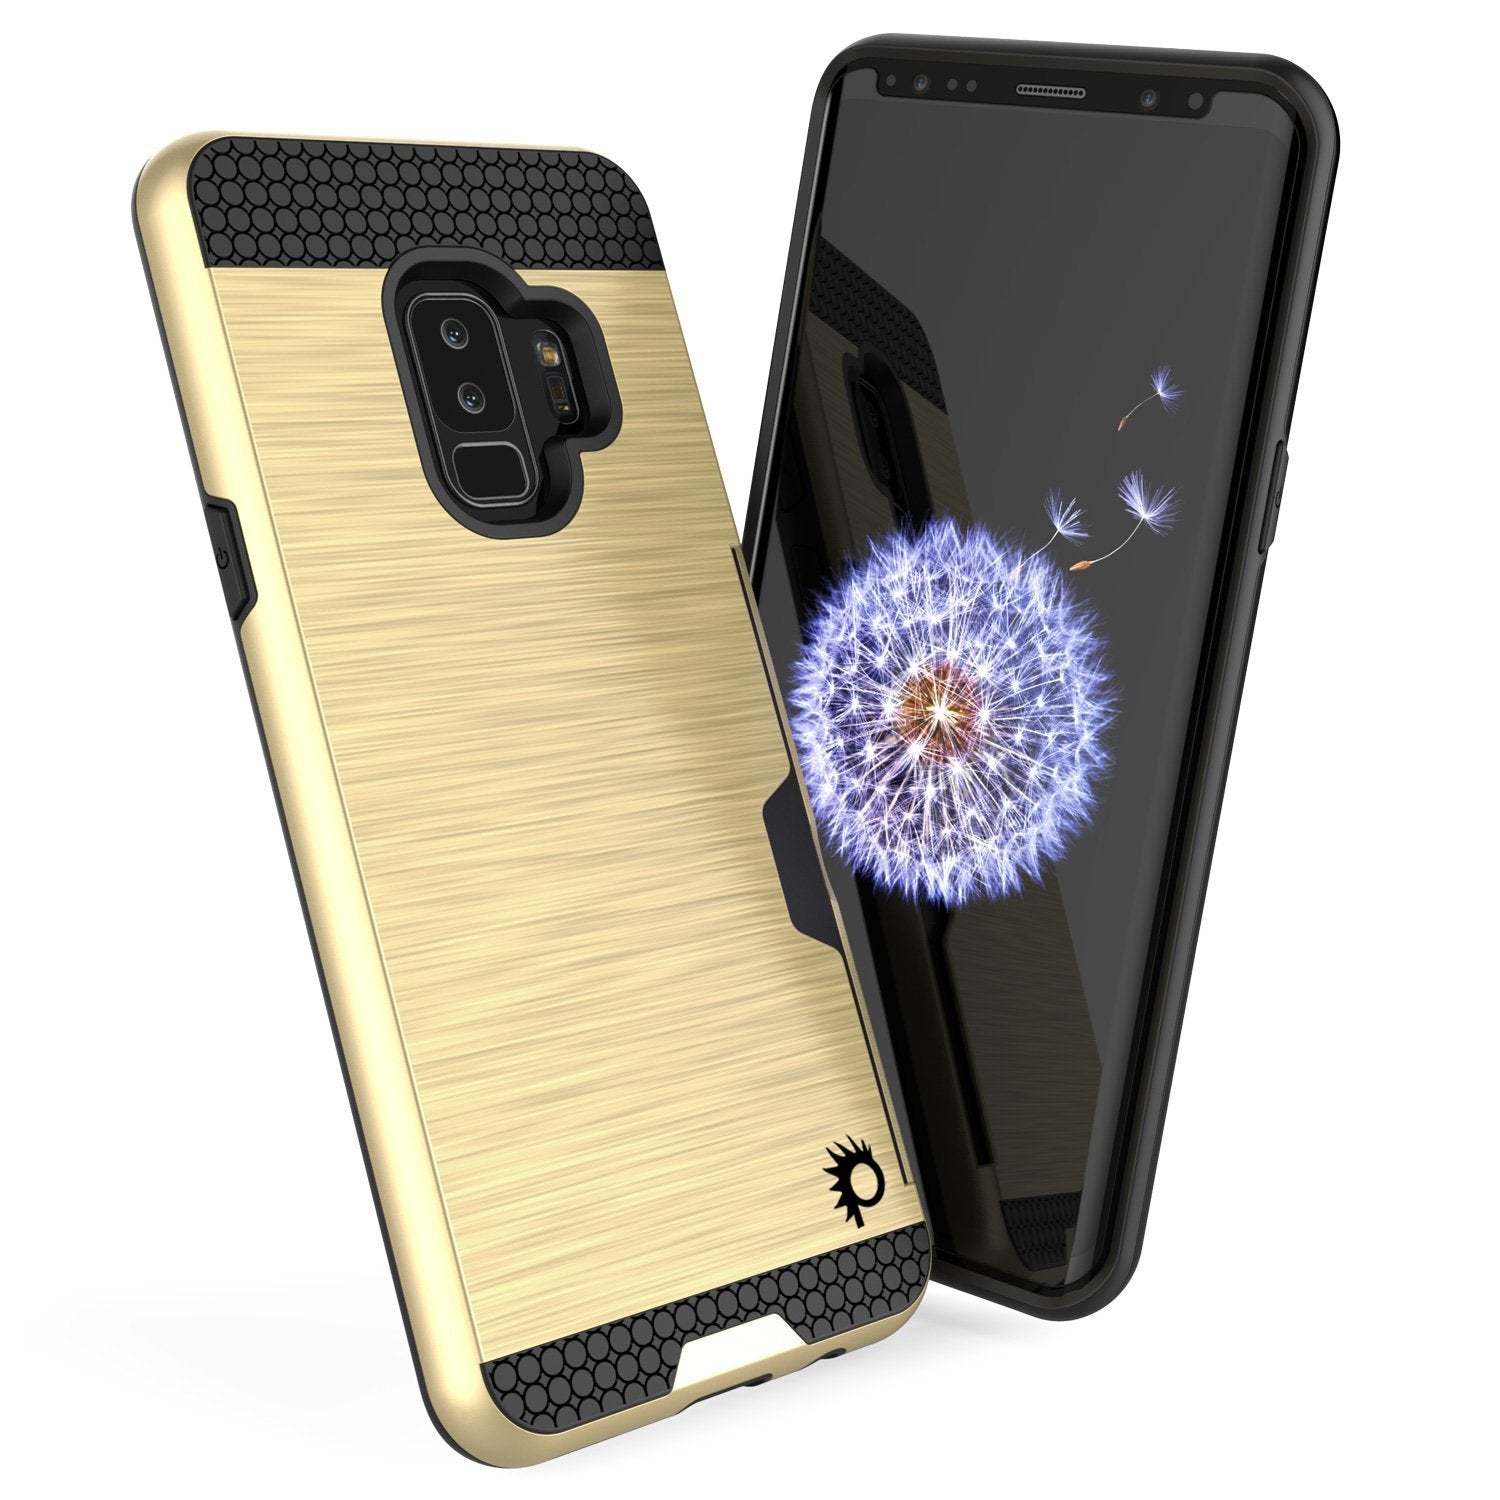 Galaxy S9 Plus Case, PUNKcase [SLOT Series] [Slim Fit] Dual-Layer Armor Cover w/Integrated Anti-Shock System [Gold]